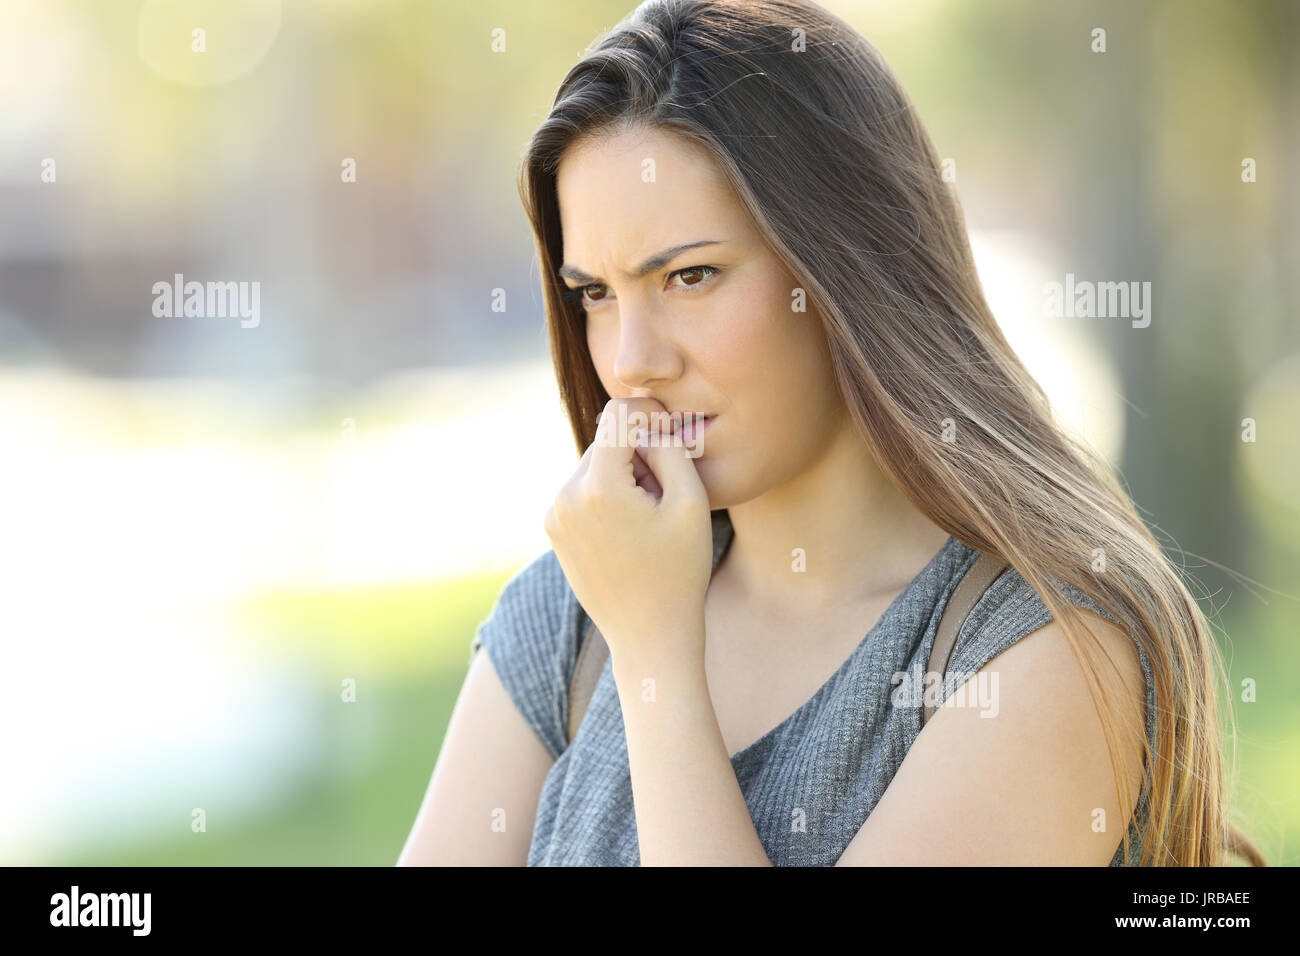 Nervous woman biting nails and looking away alone outdoors in the street Stock Photo